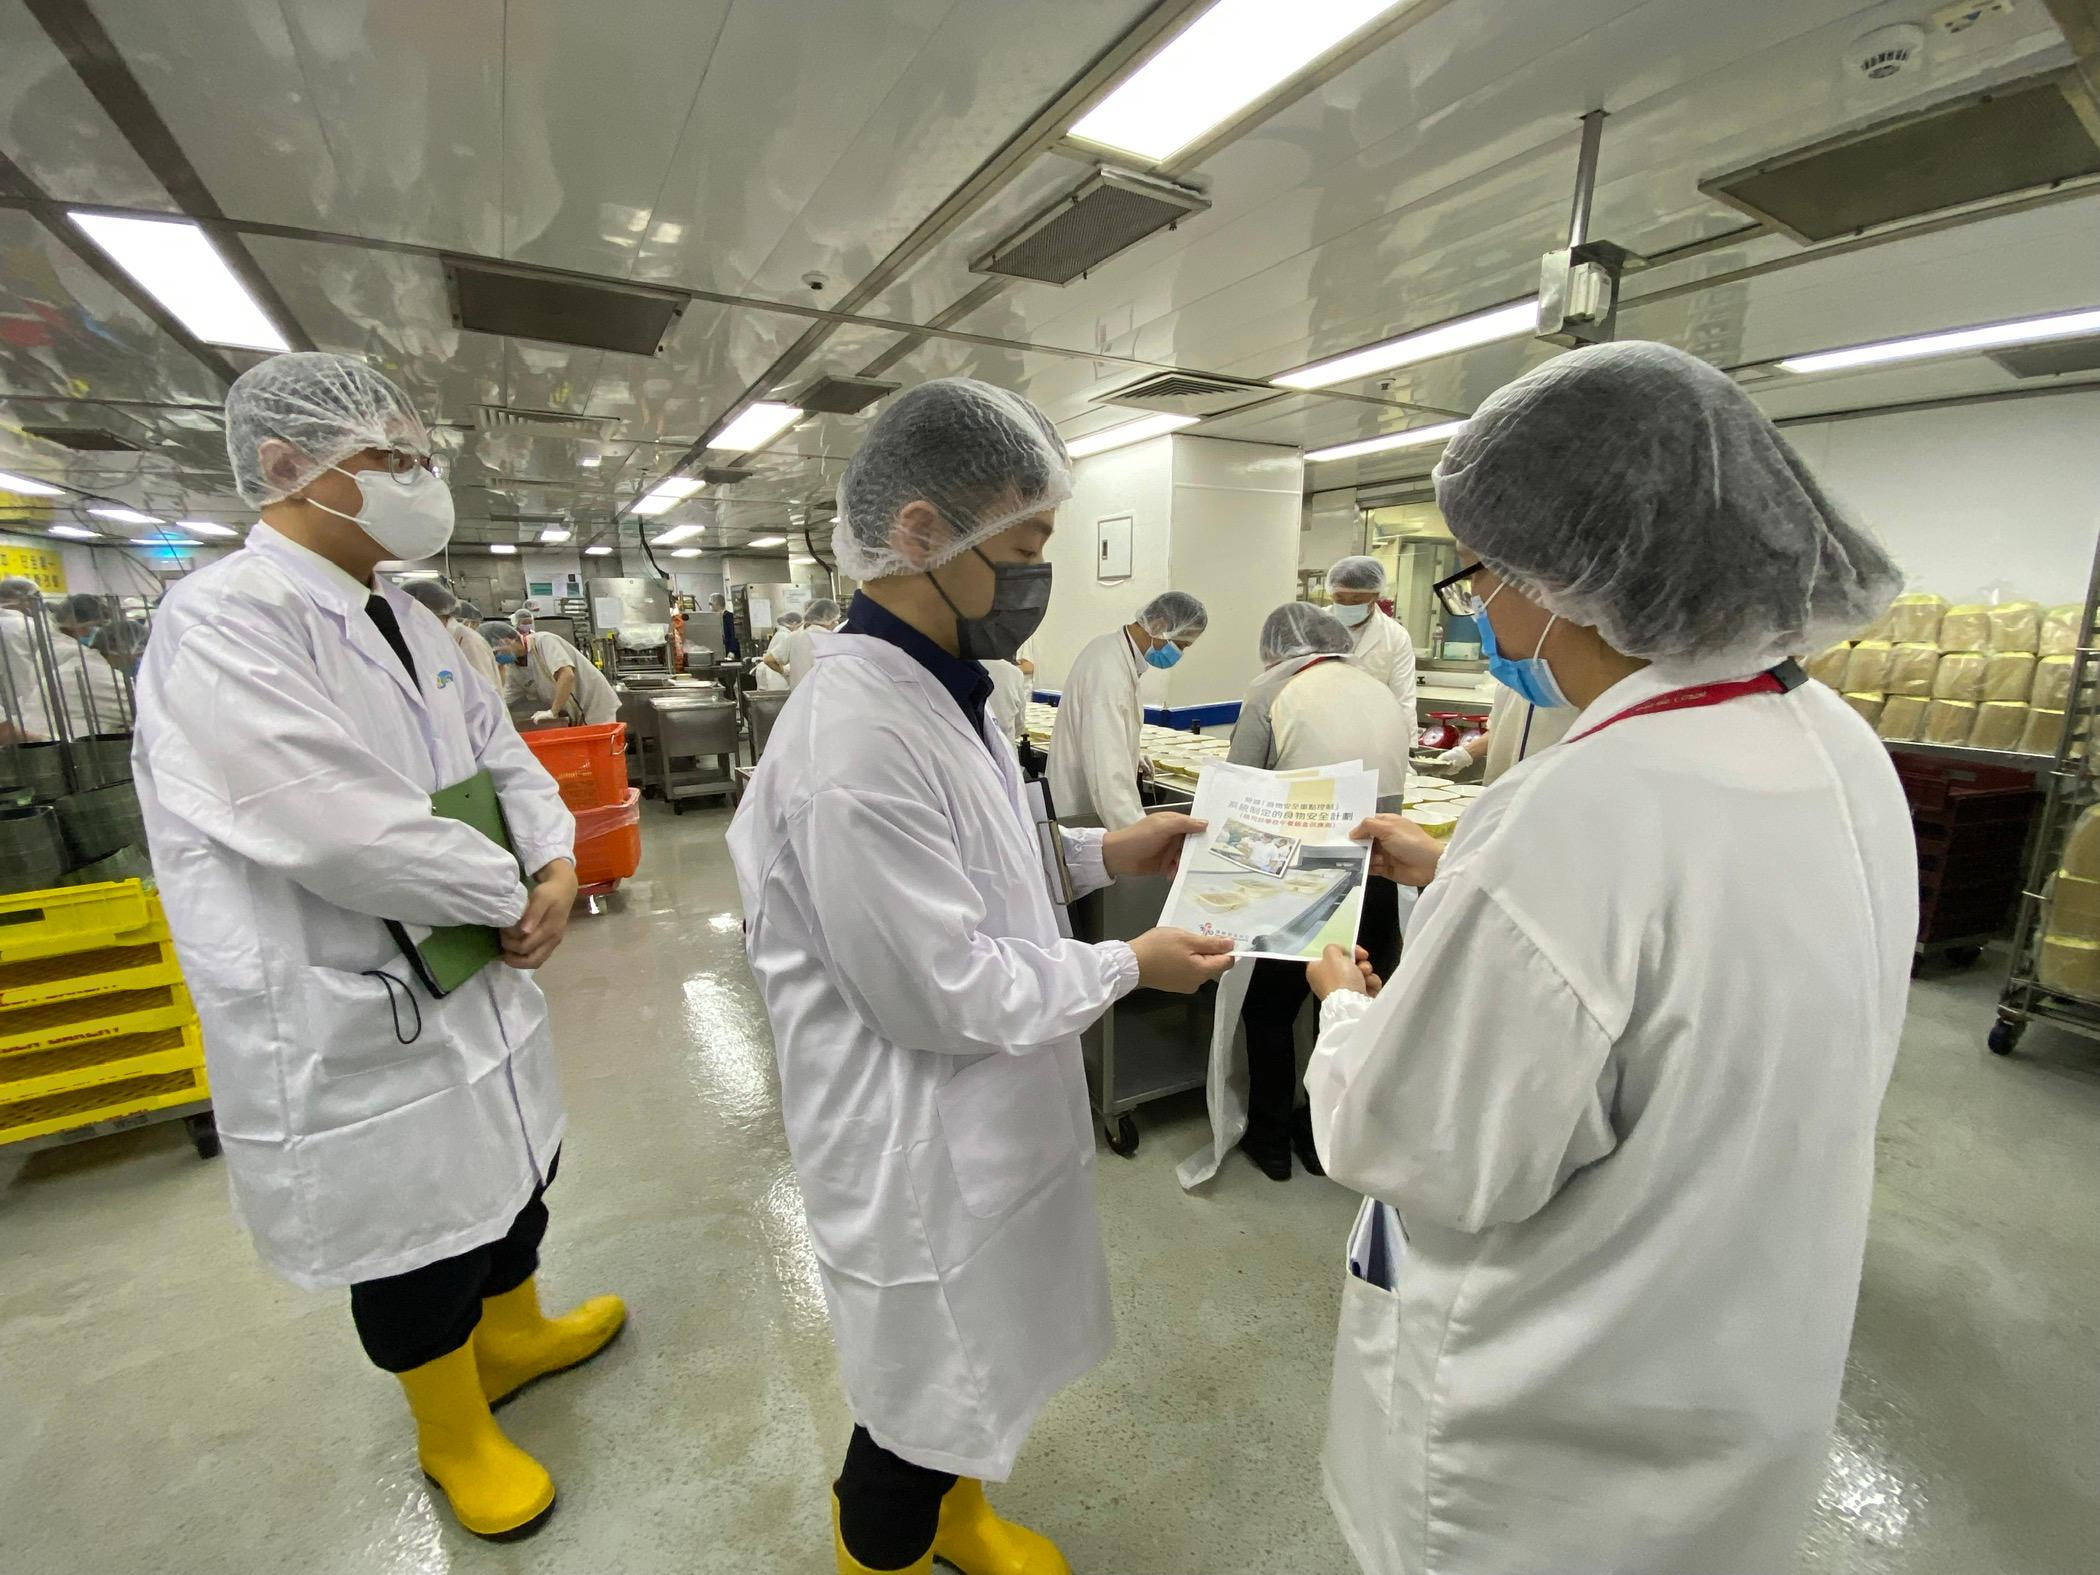 The Food and Environmental Hygiene Department today (February 20) arranged inspections to food factories supplying lunch boxes, and reminded suppliers to develop a food safety plan based on the Hazard Analysis and Critical Control Point system.